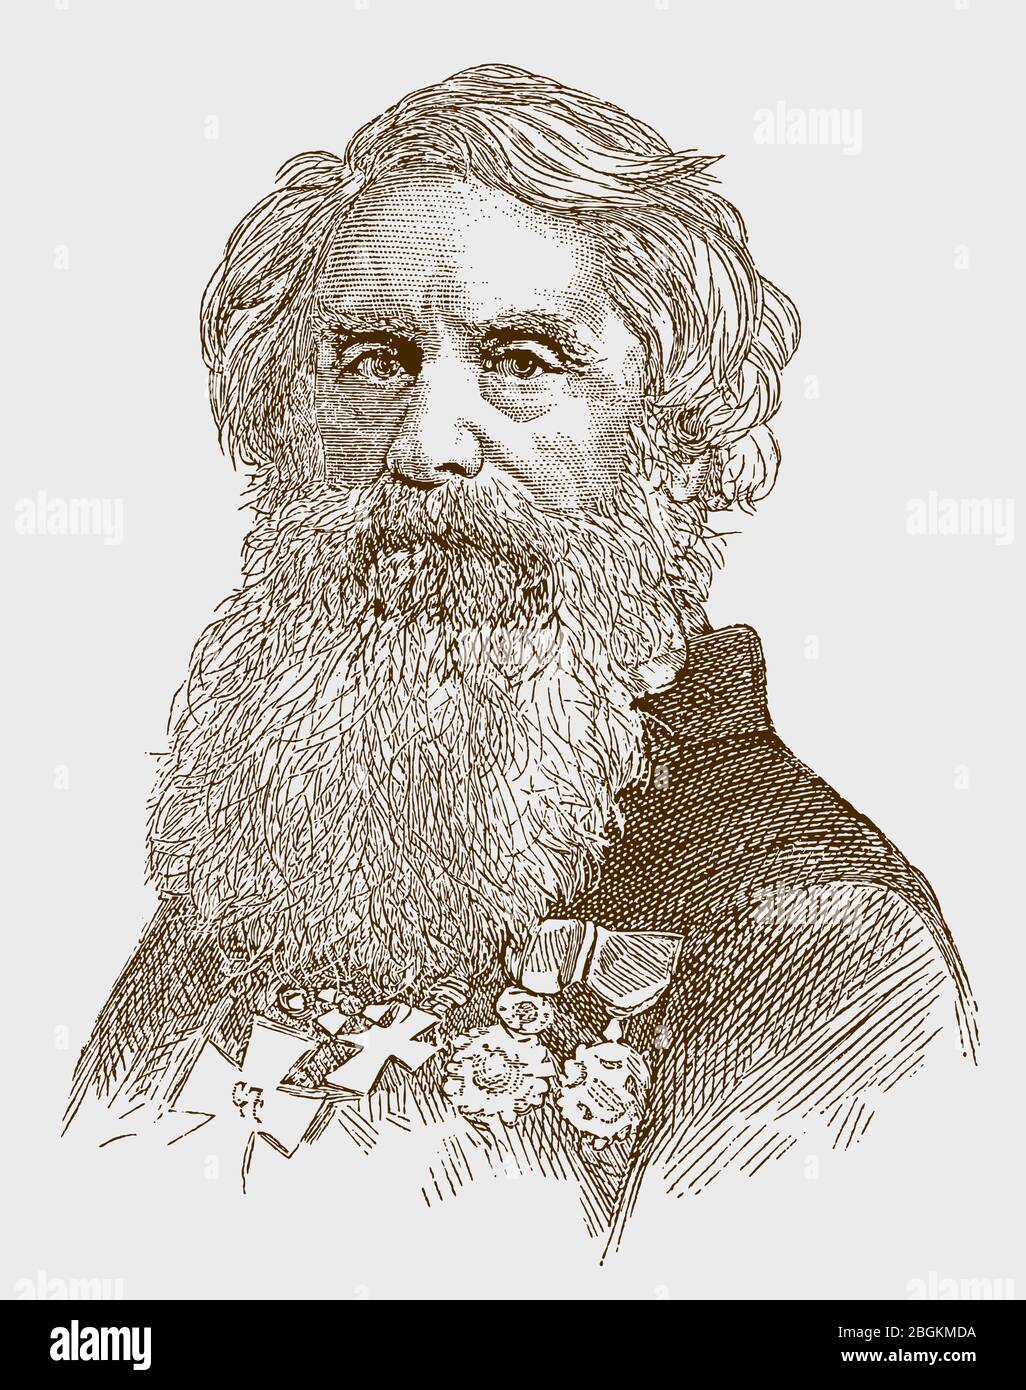 Historical portrait of Samuel Finley Breese Morse the famous american inventor and painter. lllustration after an engraving from the 19th century Stock Vector